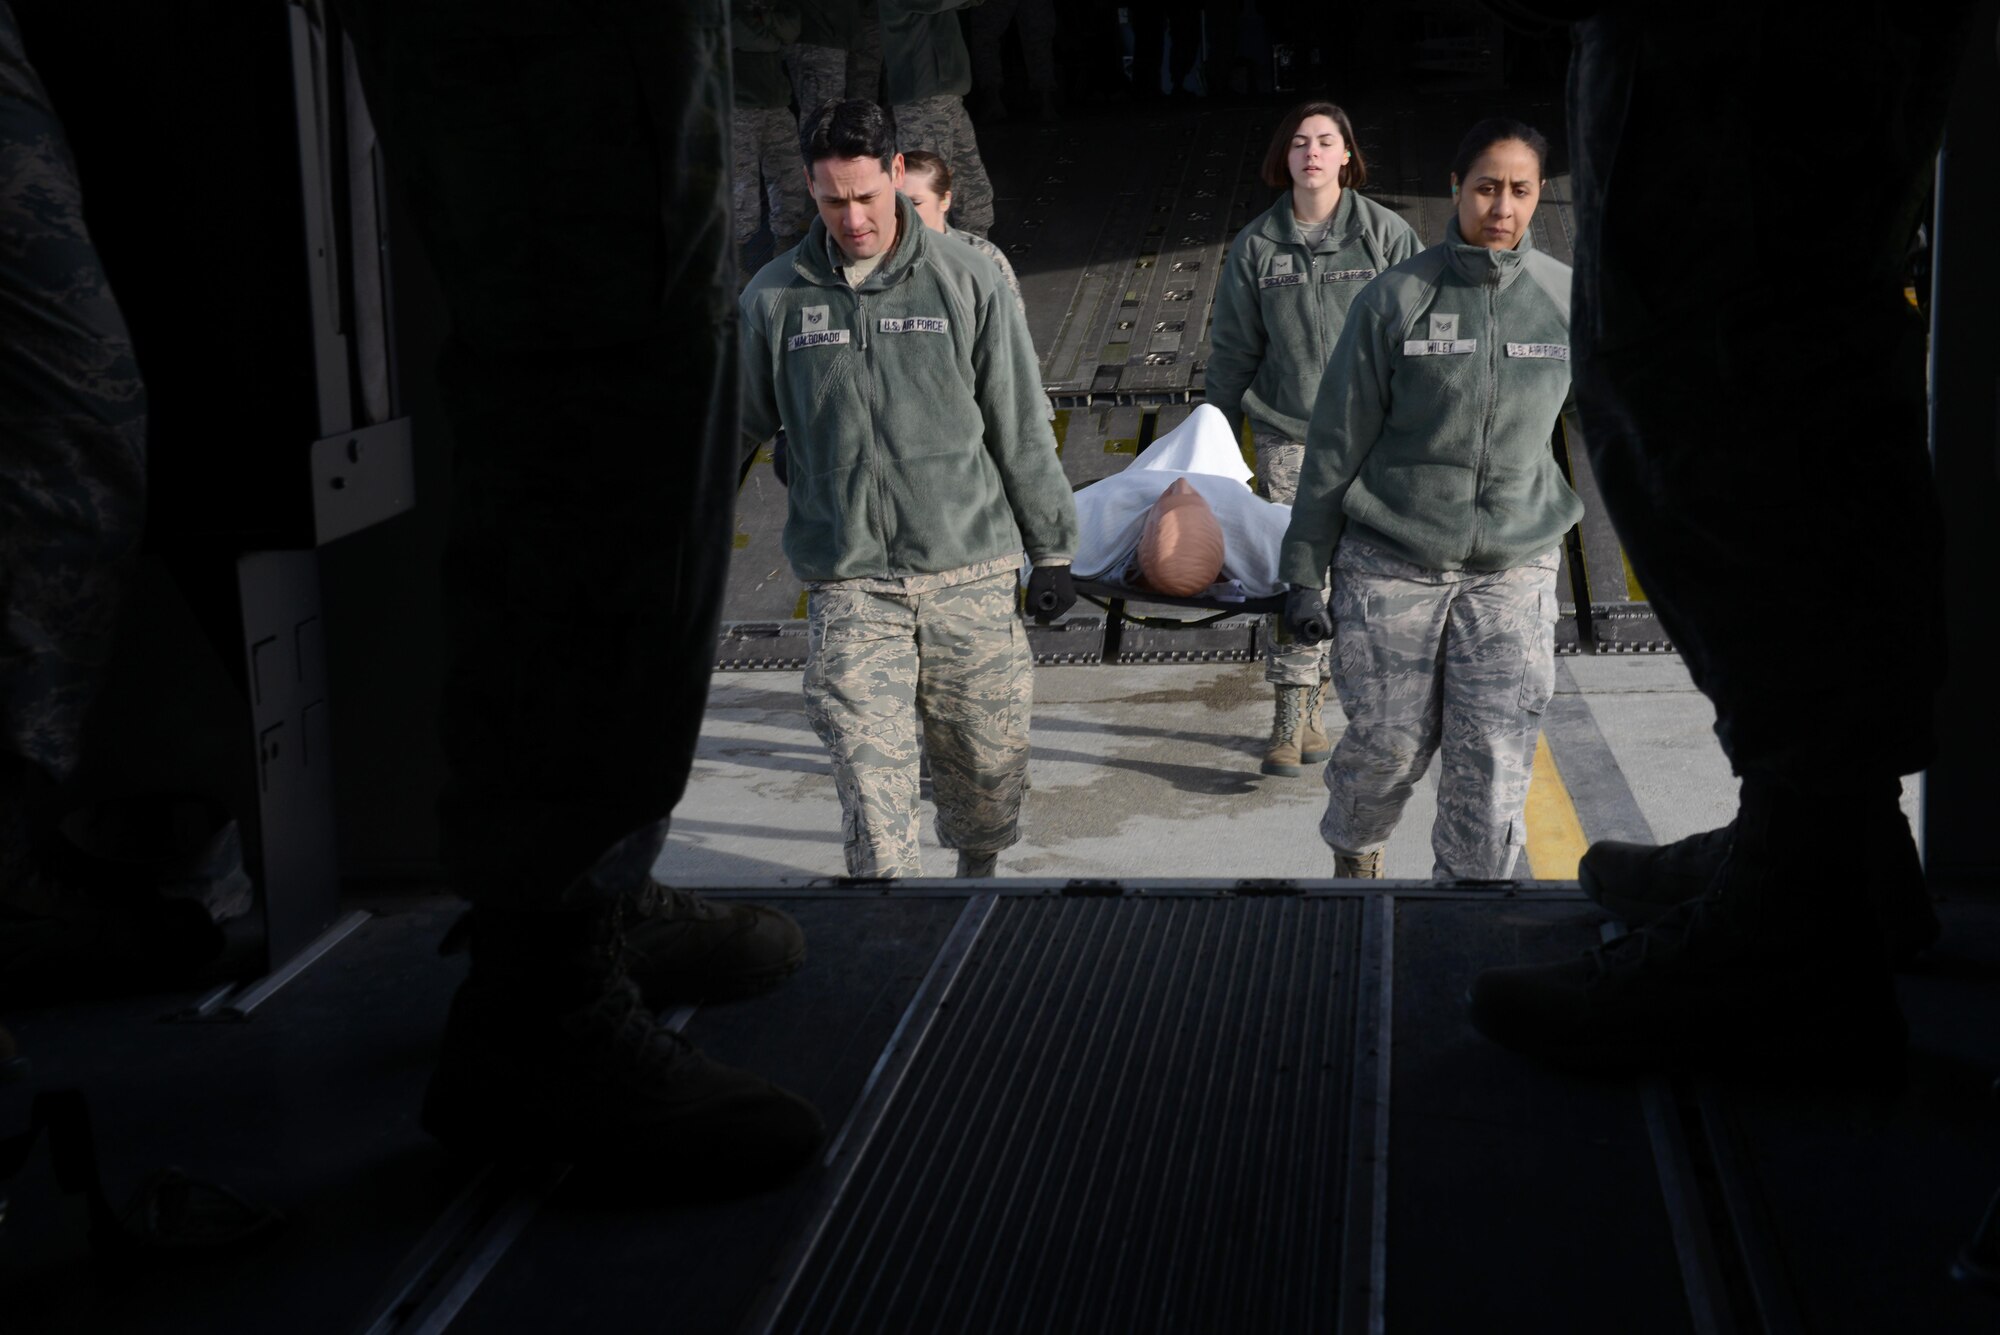 673d Medical Group Airmen transport a simulated patient from a C-17 Globemaster III into a bus during the EnRoute Patient Staging System exercise at Joint Base Elmendorf-Richardson, Alaska, April 3, 2017. The ERPSS provides patient reception and limited emergent intervention, and ensures patients are medically and administratively prepared for flight in a safe and timely aeromedical evacuation.